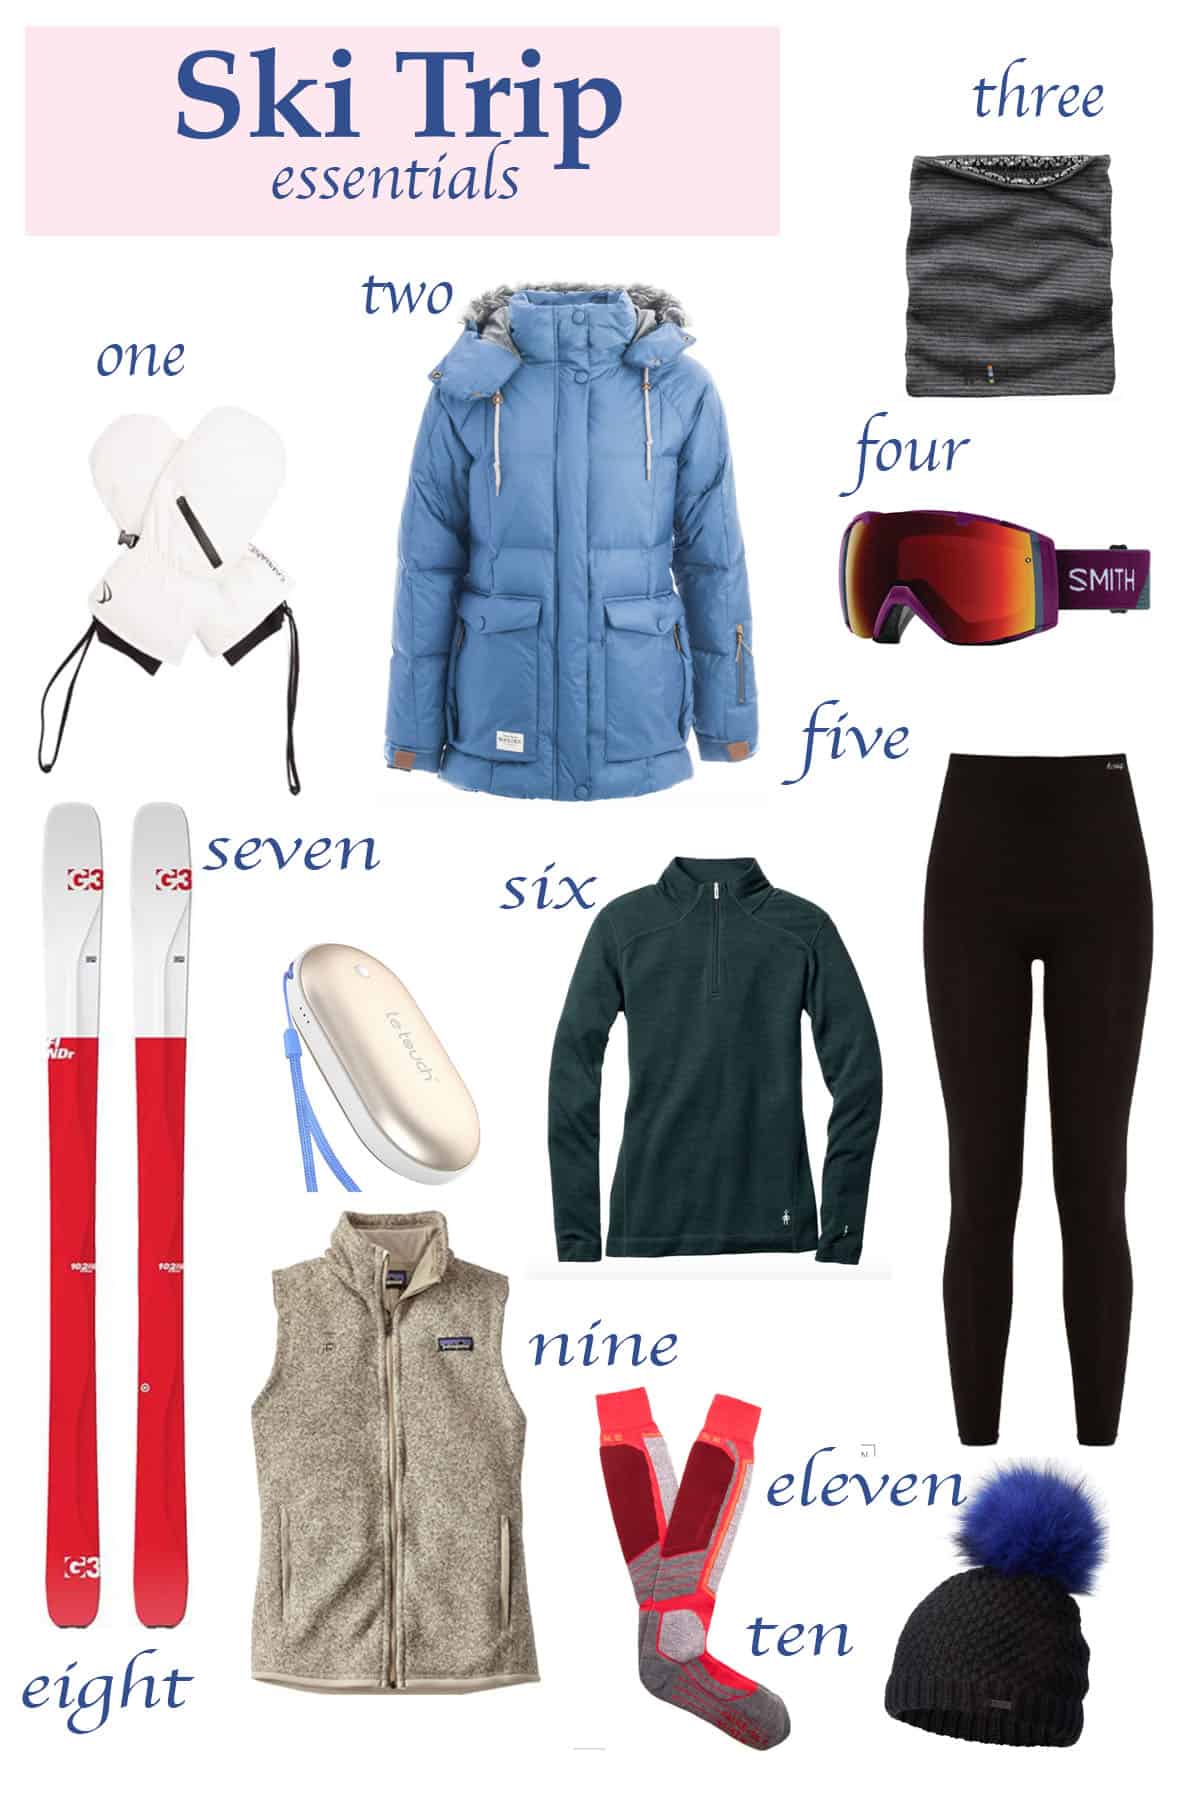 What to Wear When Skiing and Aprés Ski: What to Pack for a Ski